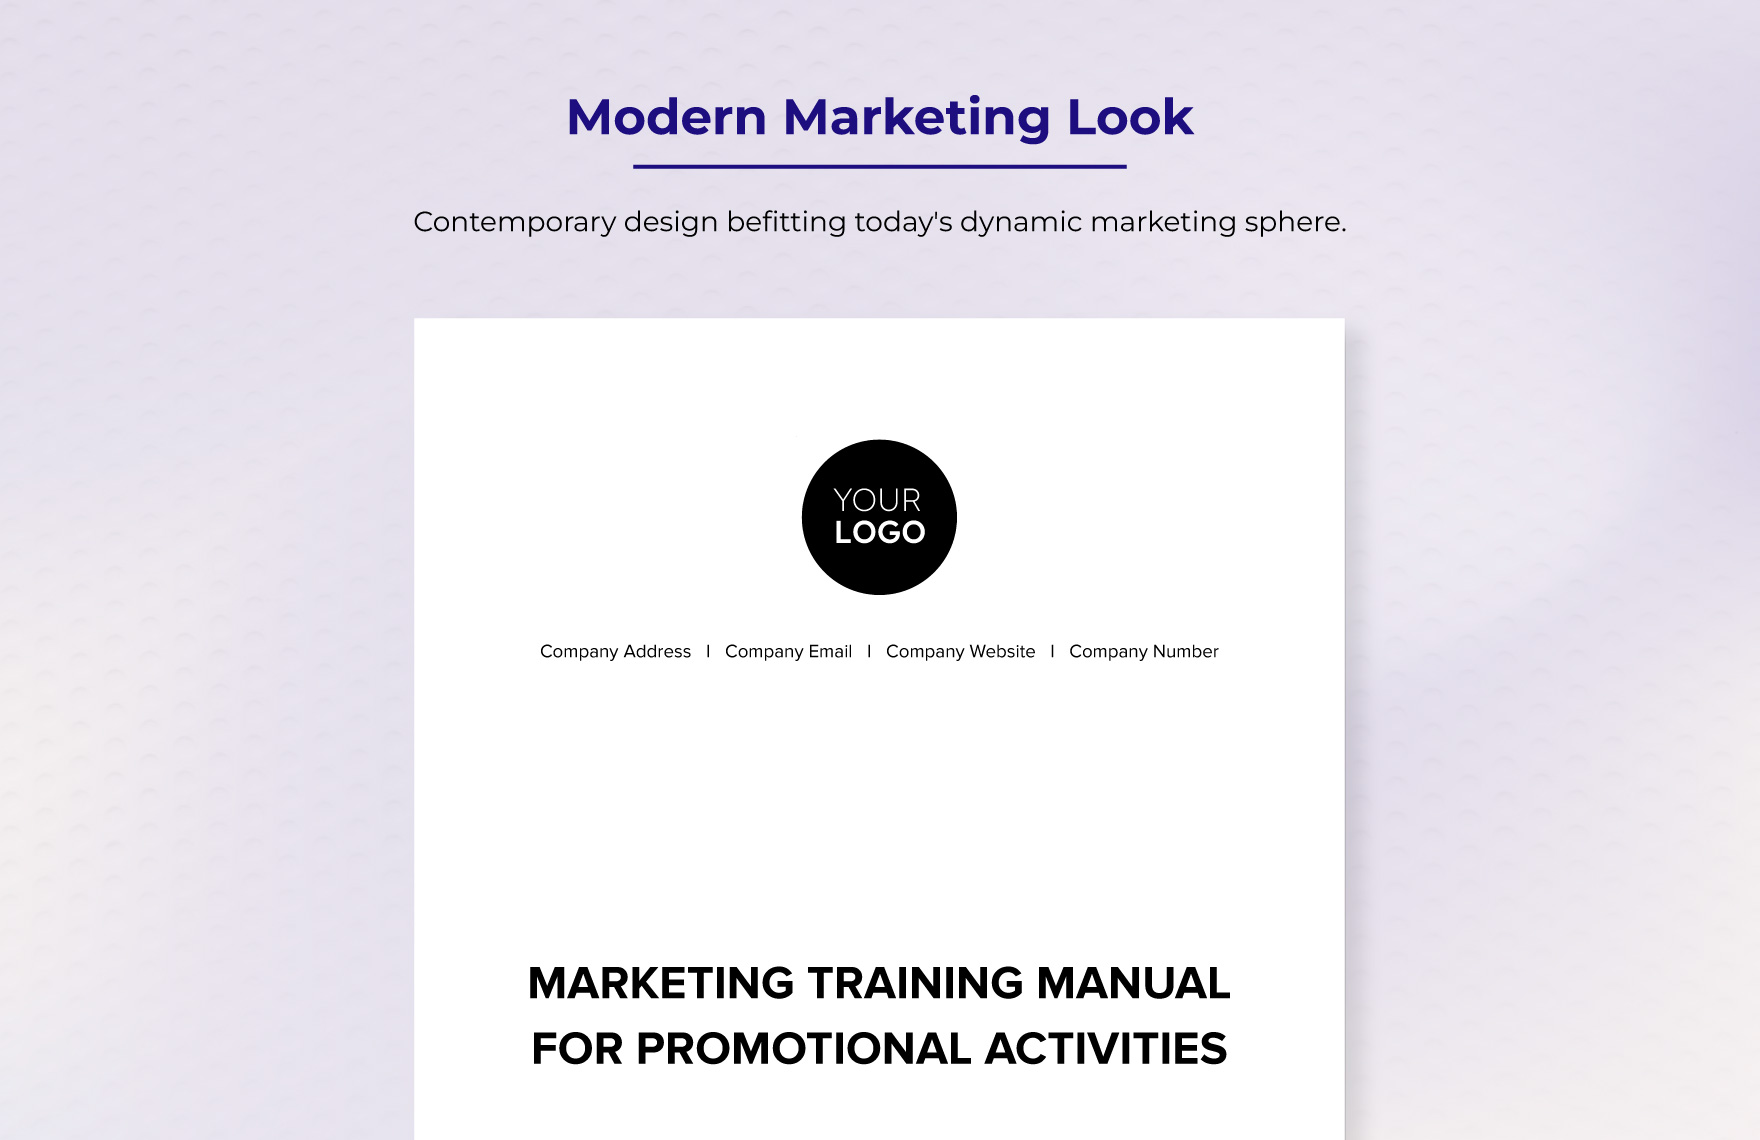 Marketing Training Manual for Promotional Activities Template